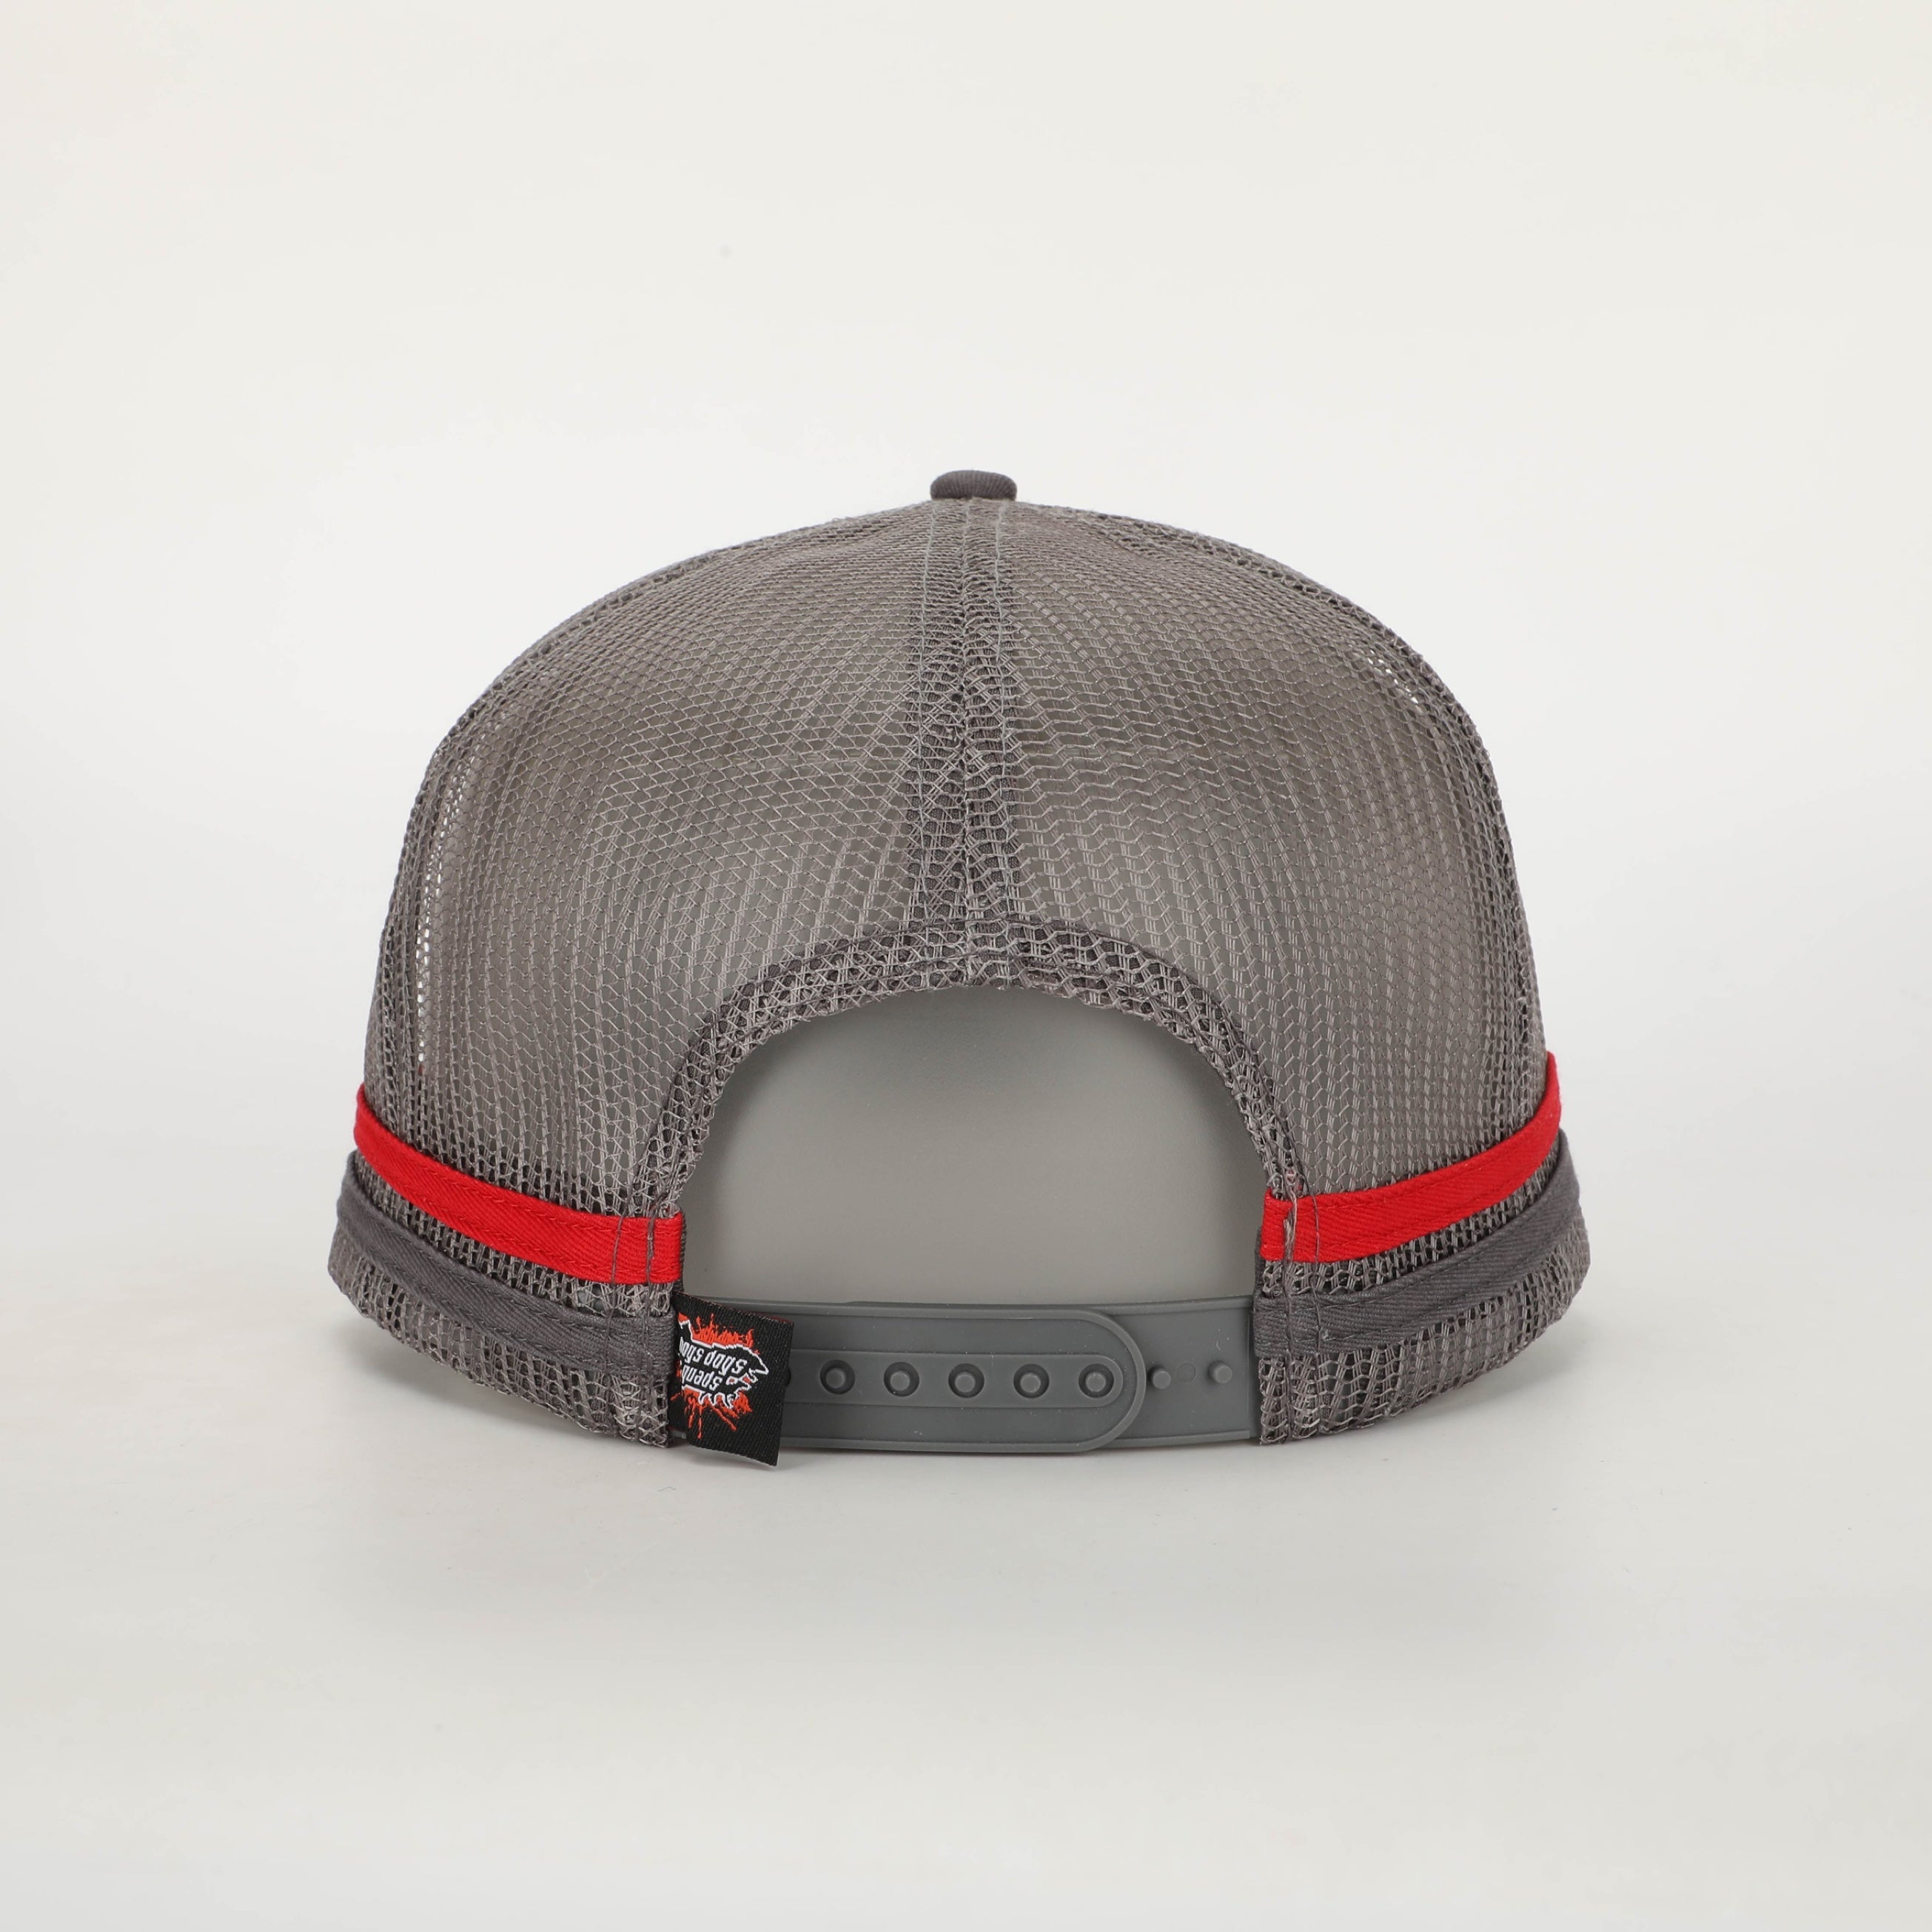 Cruiser Country - Truckers Hat Grey - Hogs Dogs Quads Shop